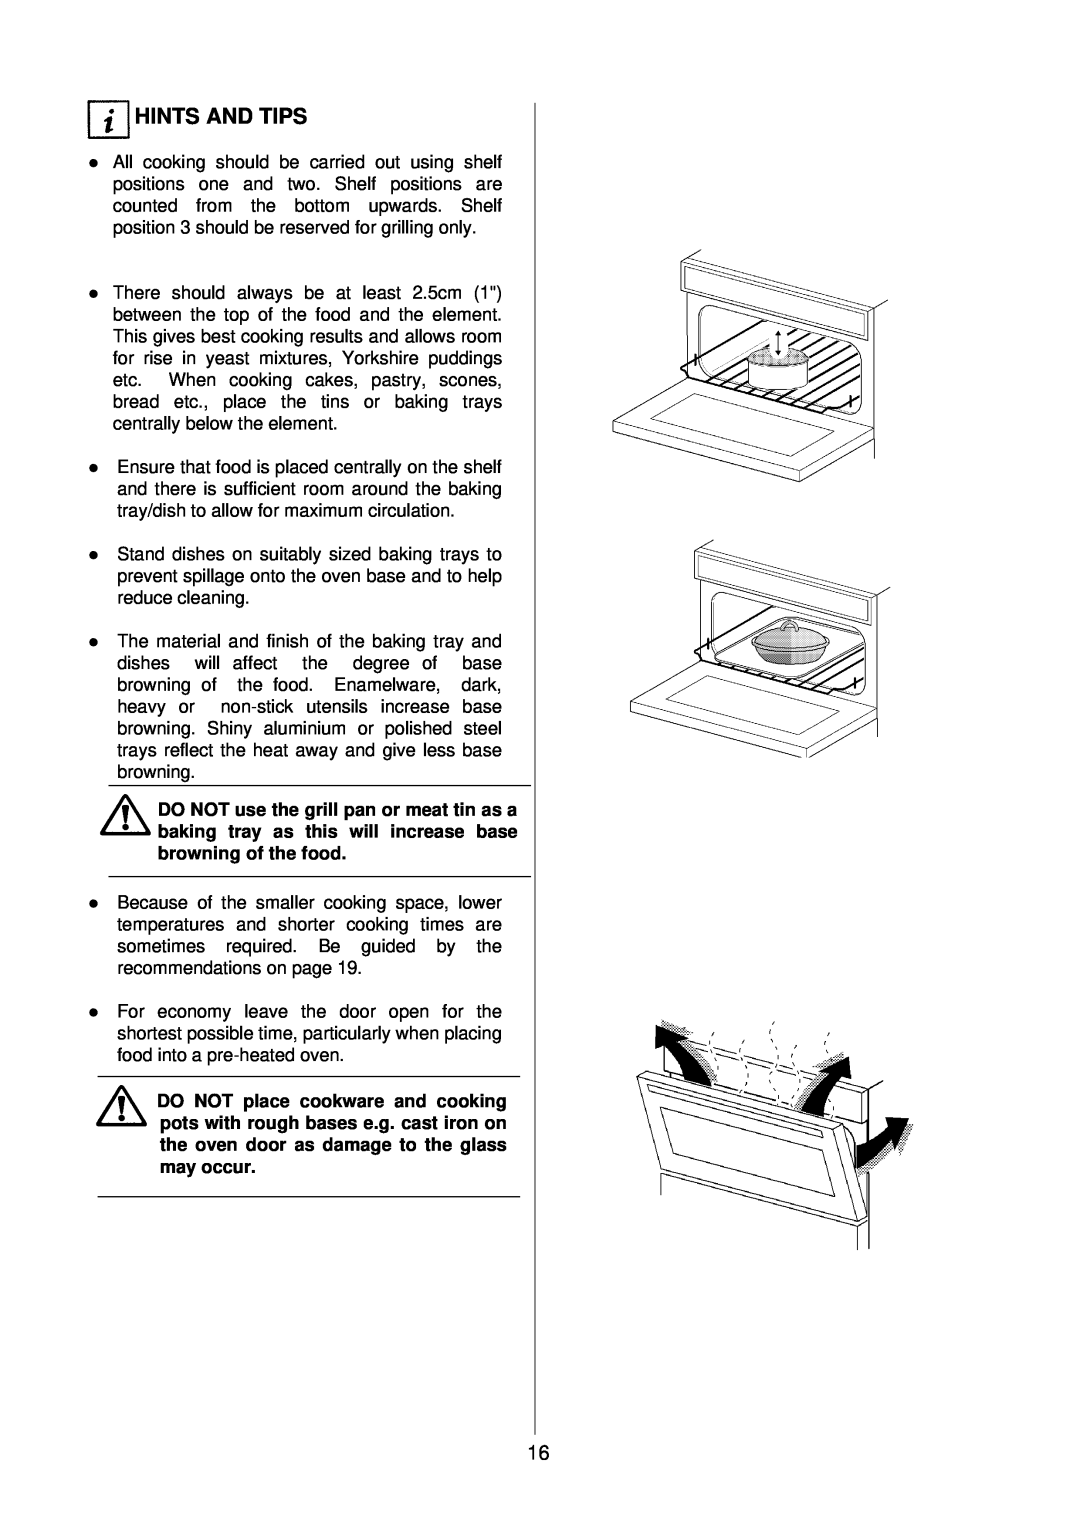 Electrolux D2160-1 operating instructions Hints And Tips, l position 3 should be reserved for grilling only 